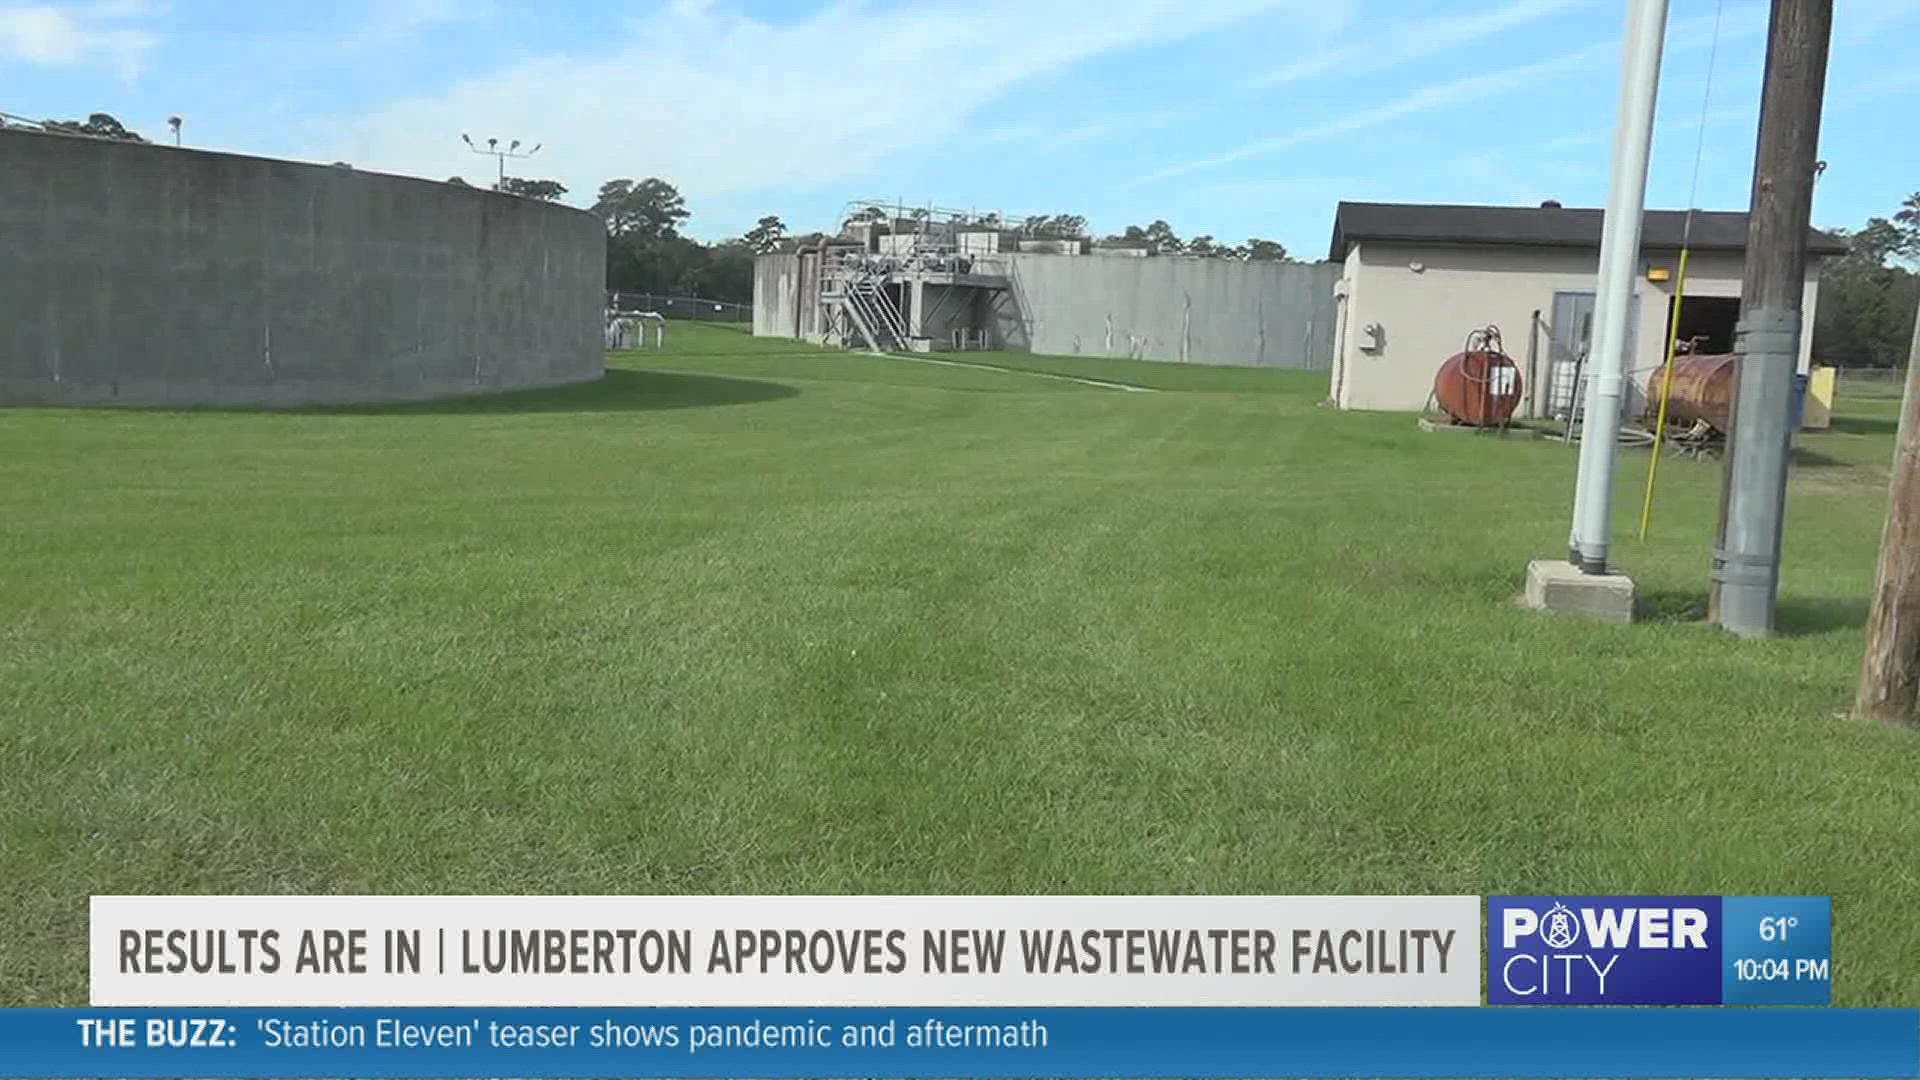 In Lumberton 58% of voters said yes to funding a $74.3M proposition to pay for a wastewater treatment system.